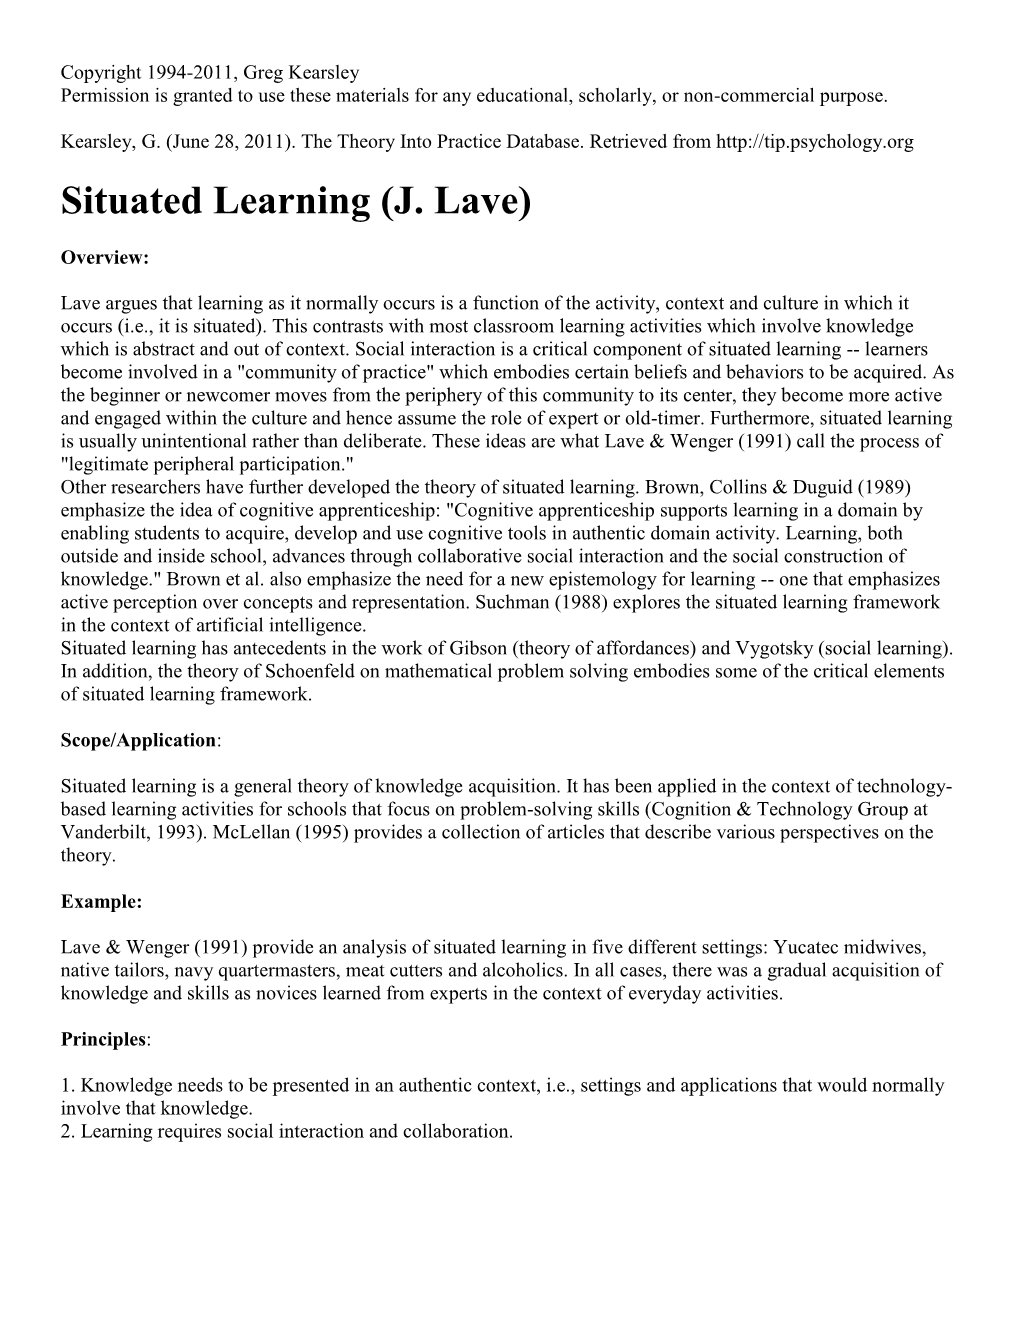 Situated Learning (J. Lave)